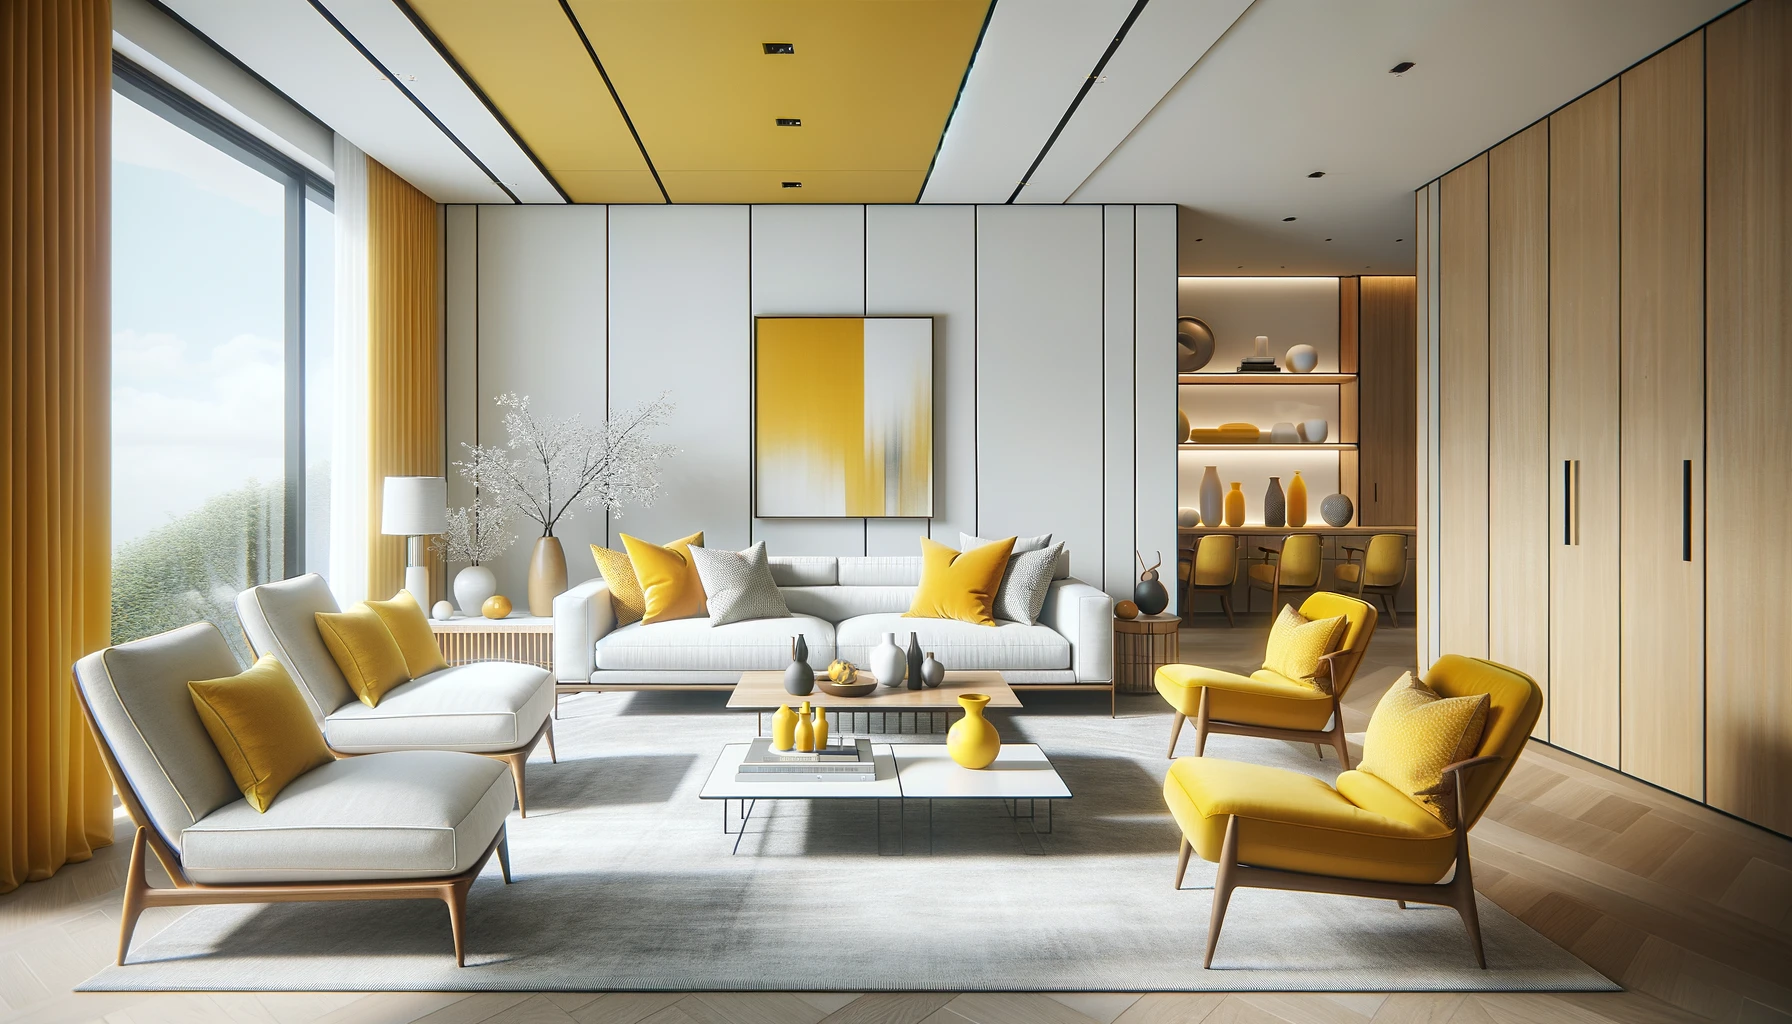 Modern lounge room interior with yellow accents and natural light.